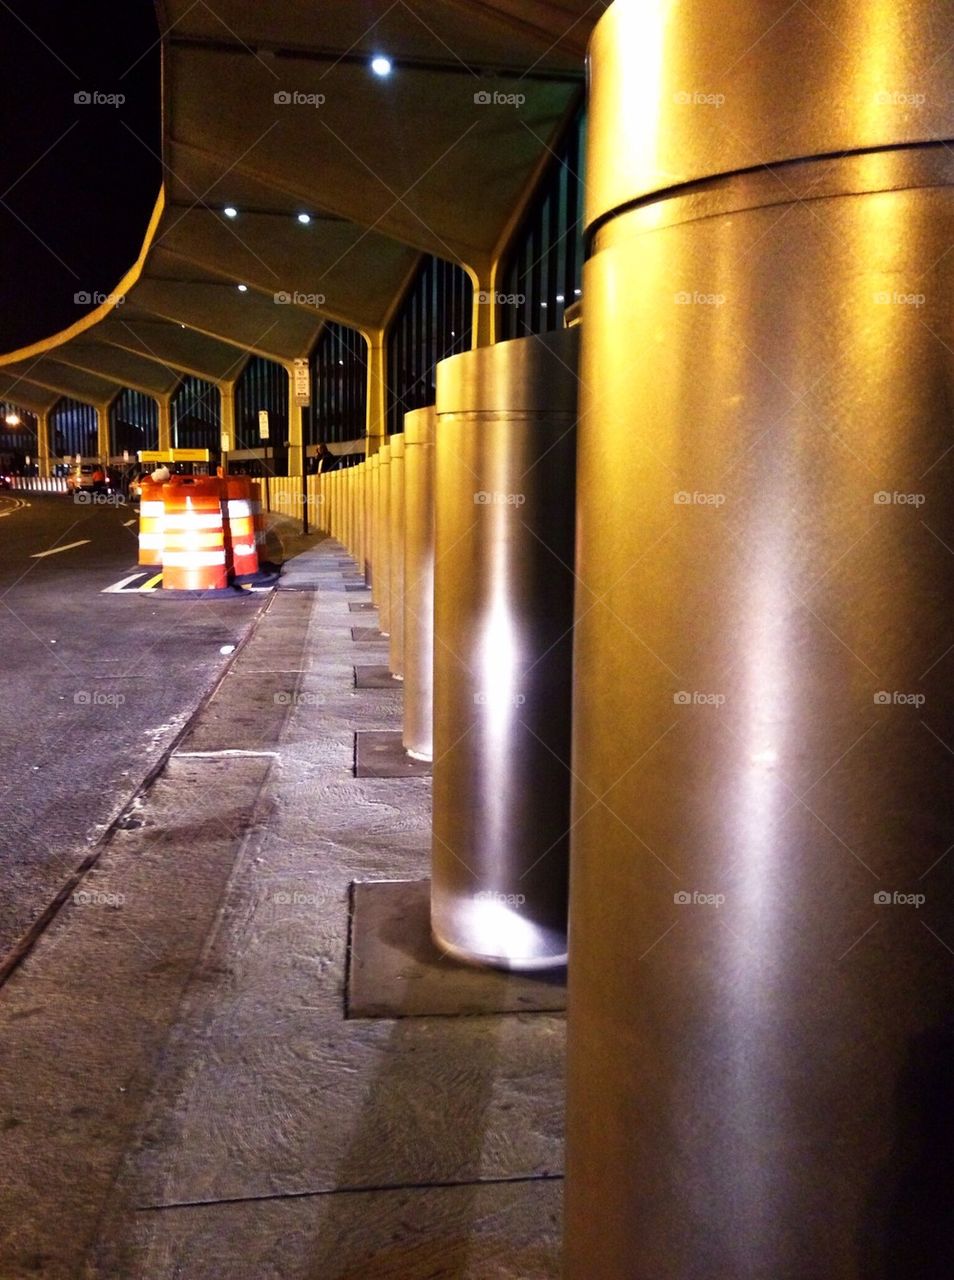 road airport pillars caution by losone77